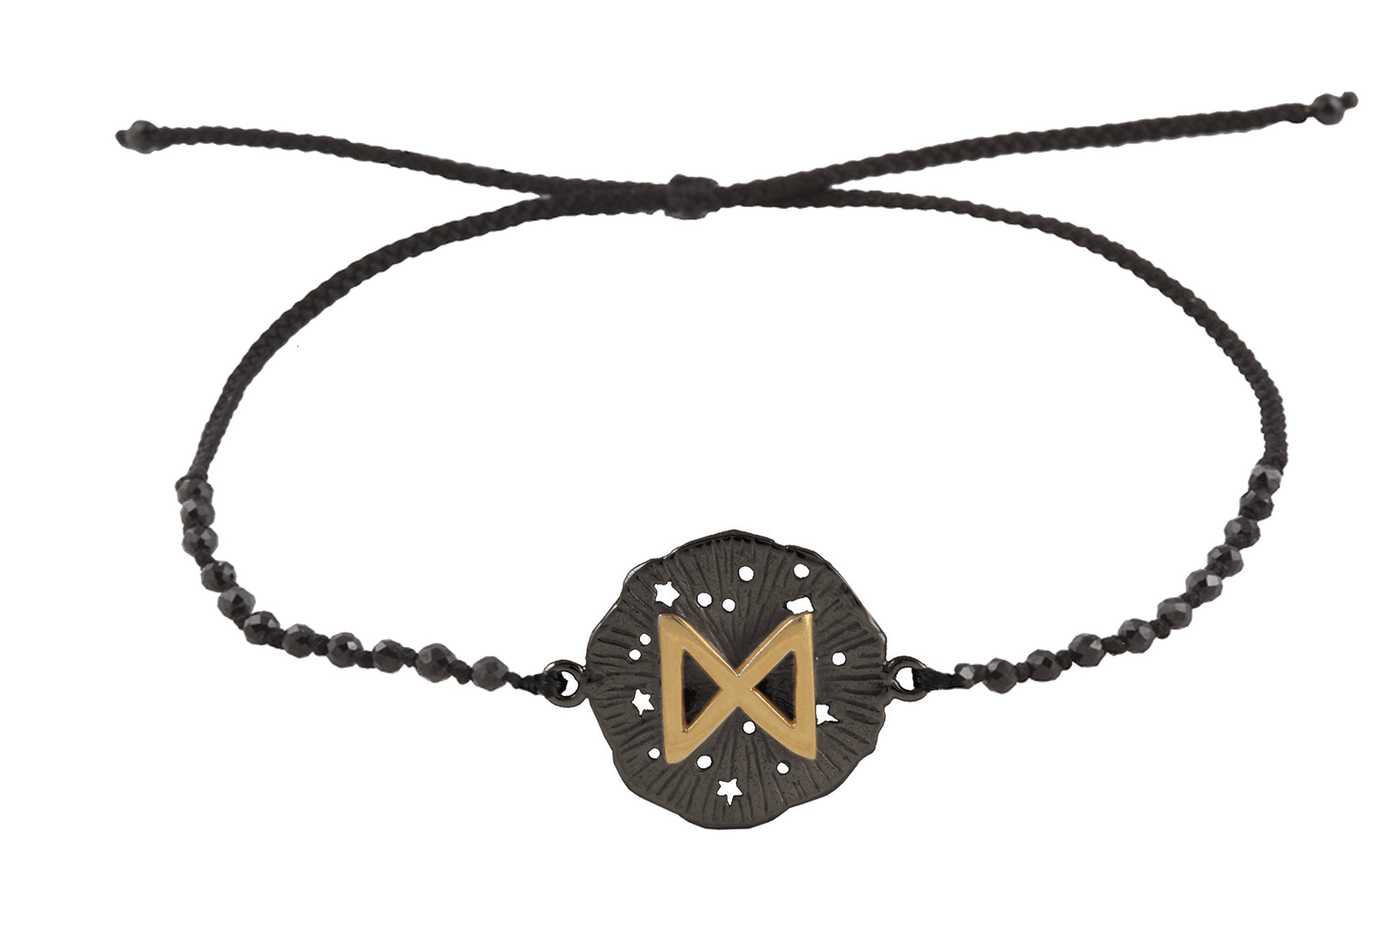 Runic medallion amulet Dagaz bracelet with beads. Gold plated and oxide